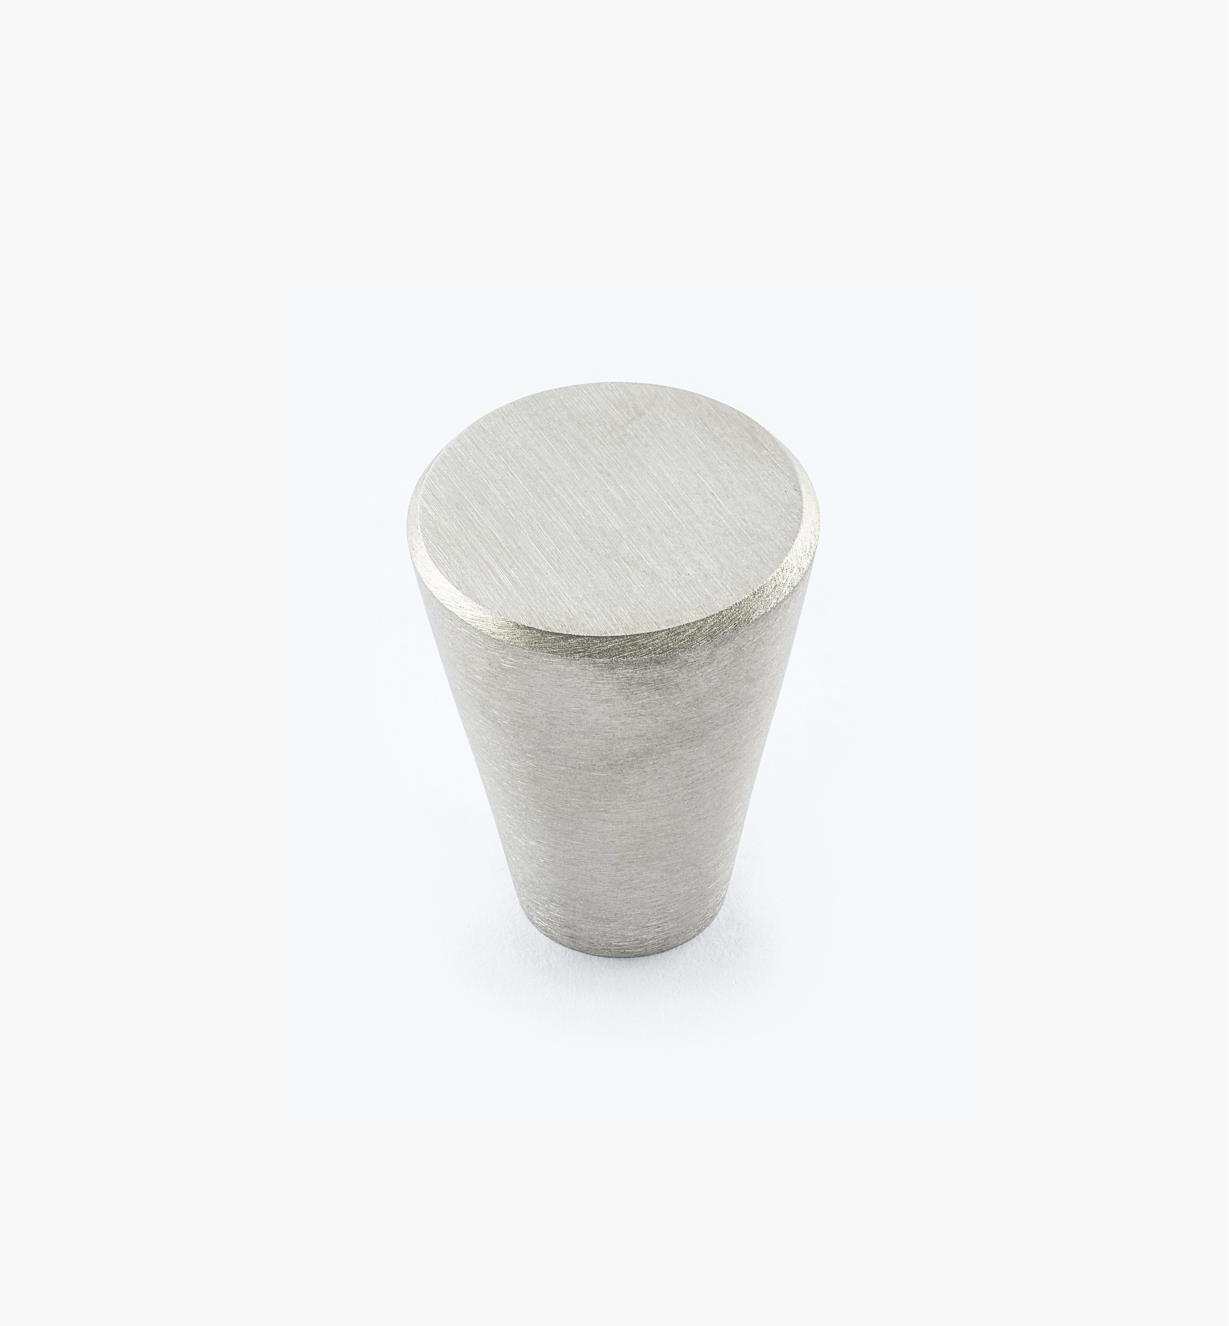 01W6350 - 20mm x 24mm Stainless Steel Tapered Knob